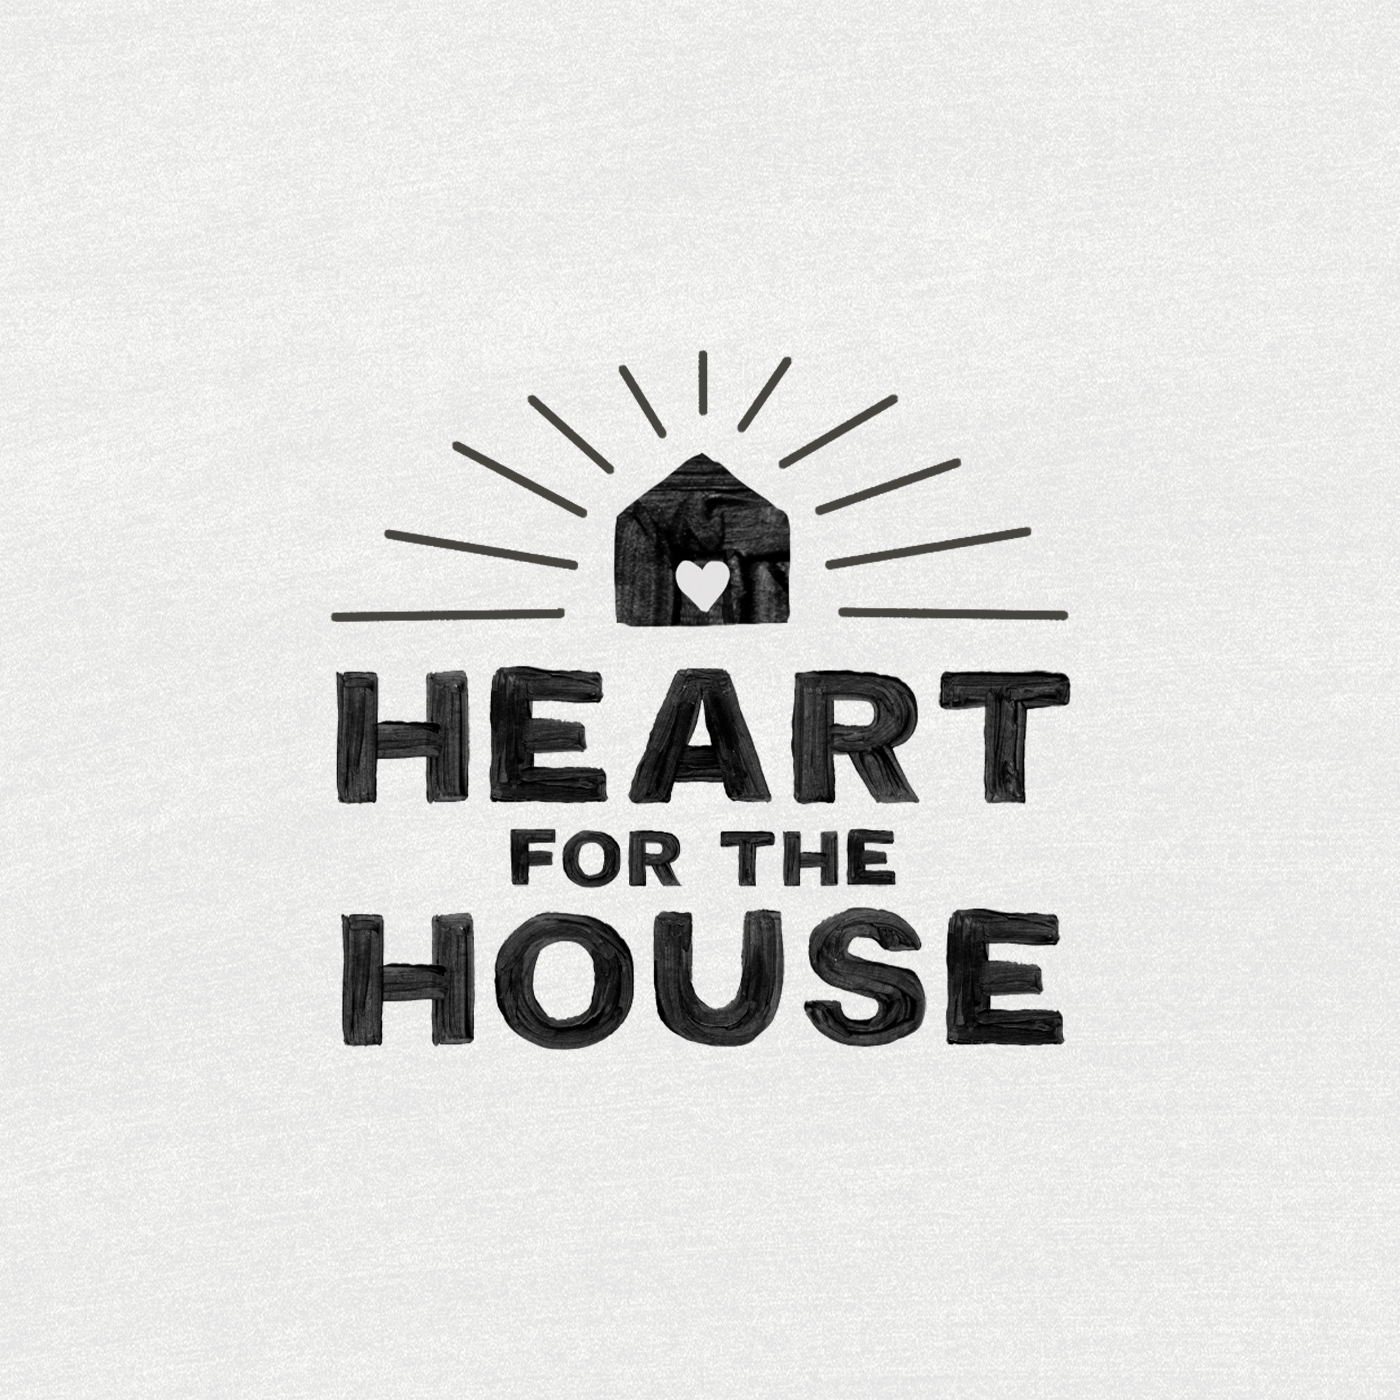 Heart for the House - Week 1